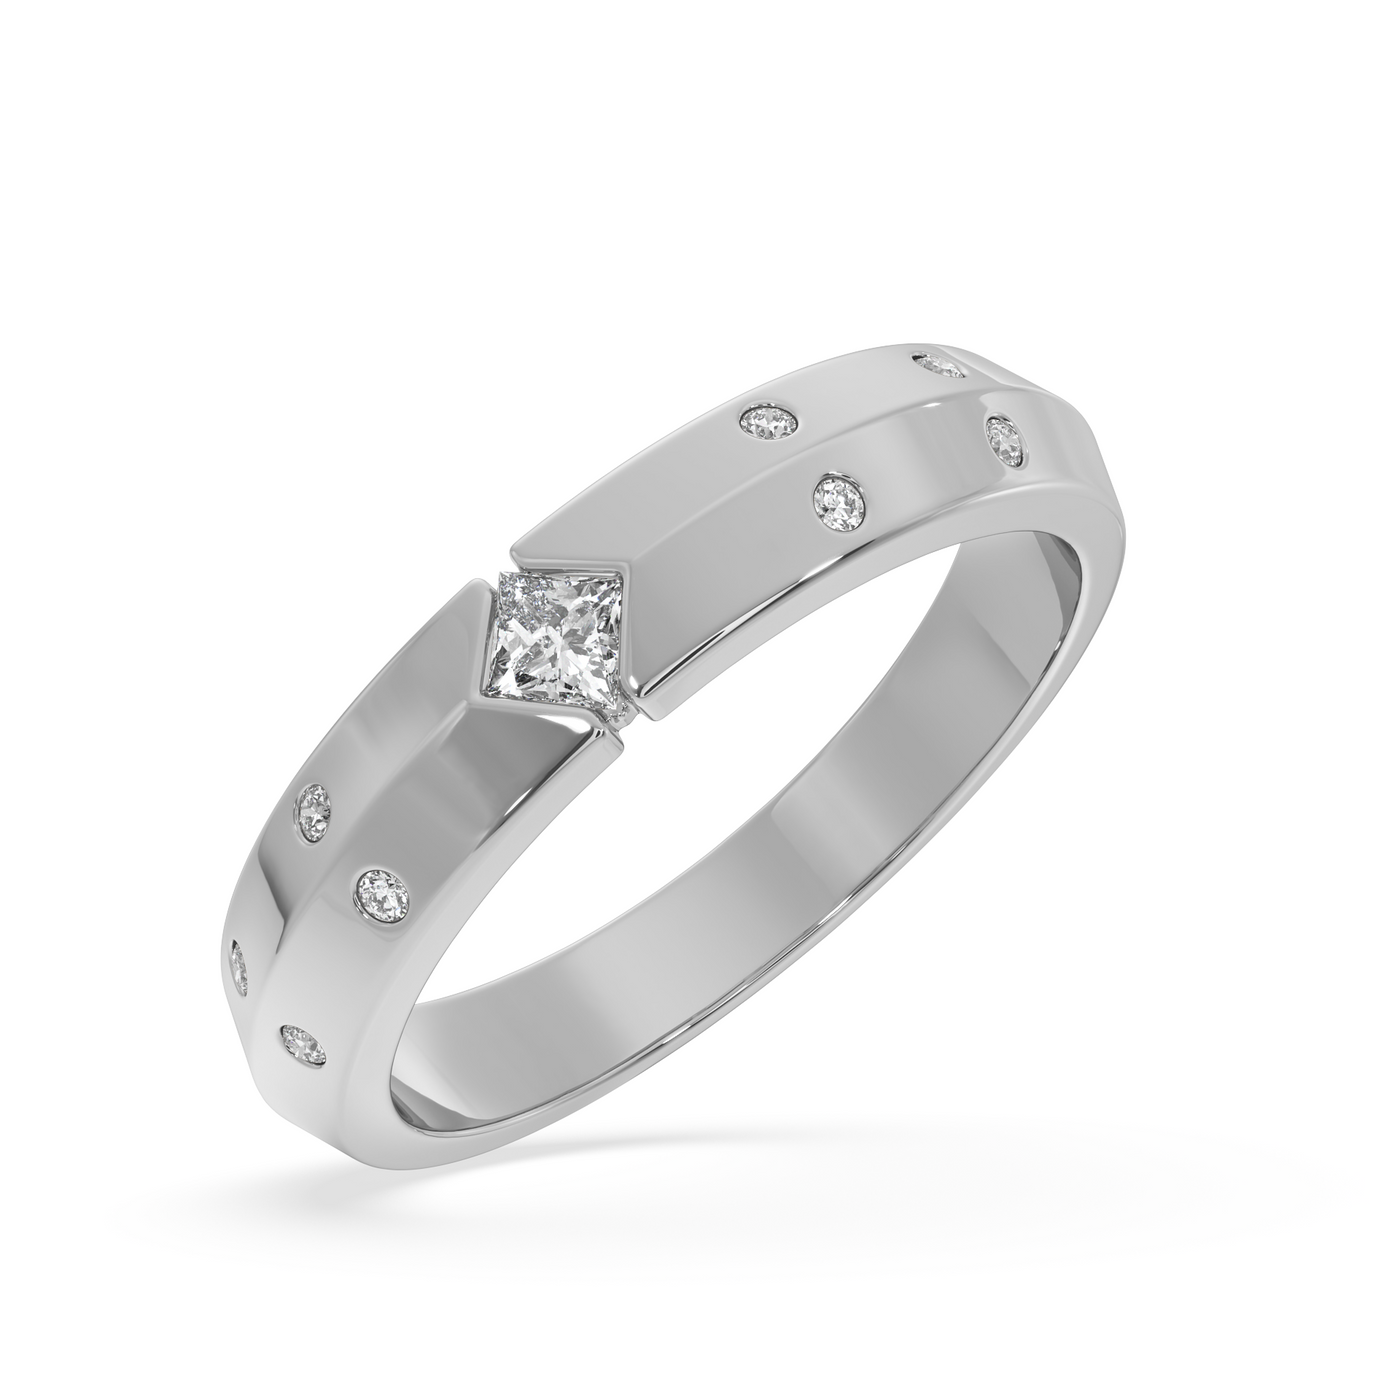 SY Women's Ring in Platinum, Hammered Finish Solitaire